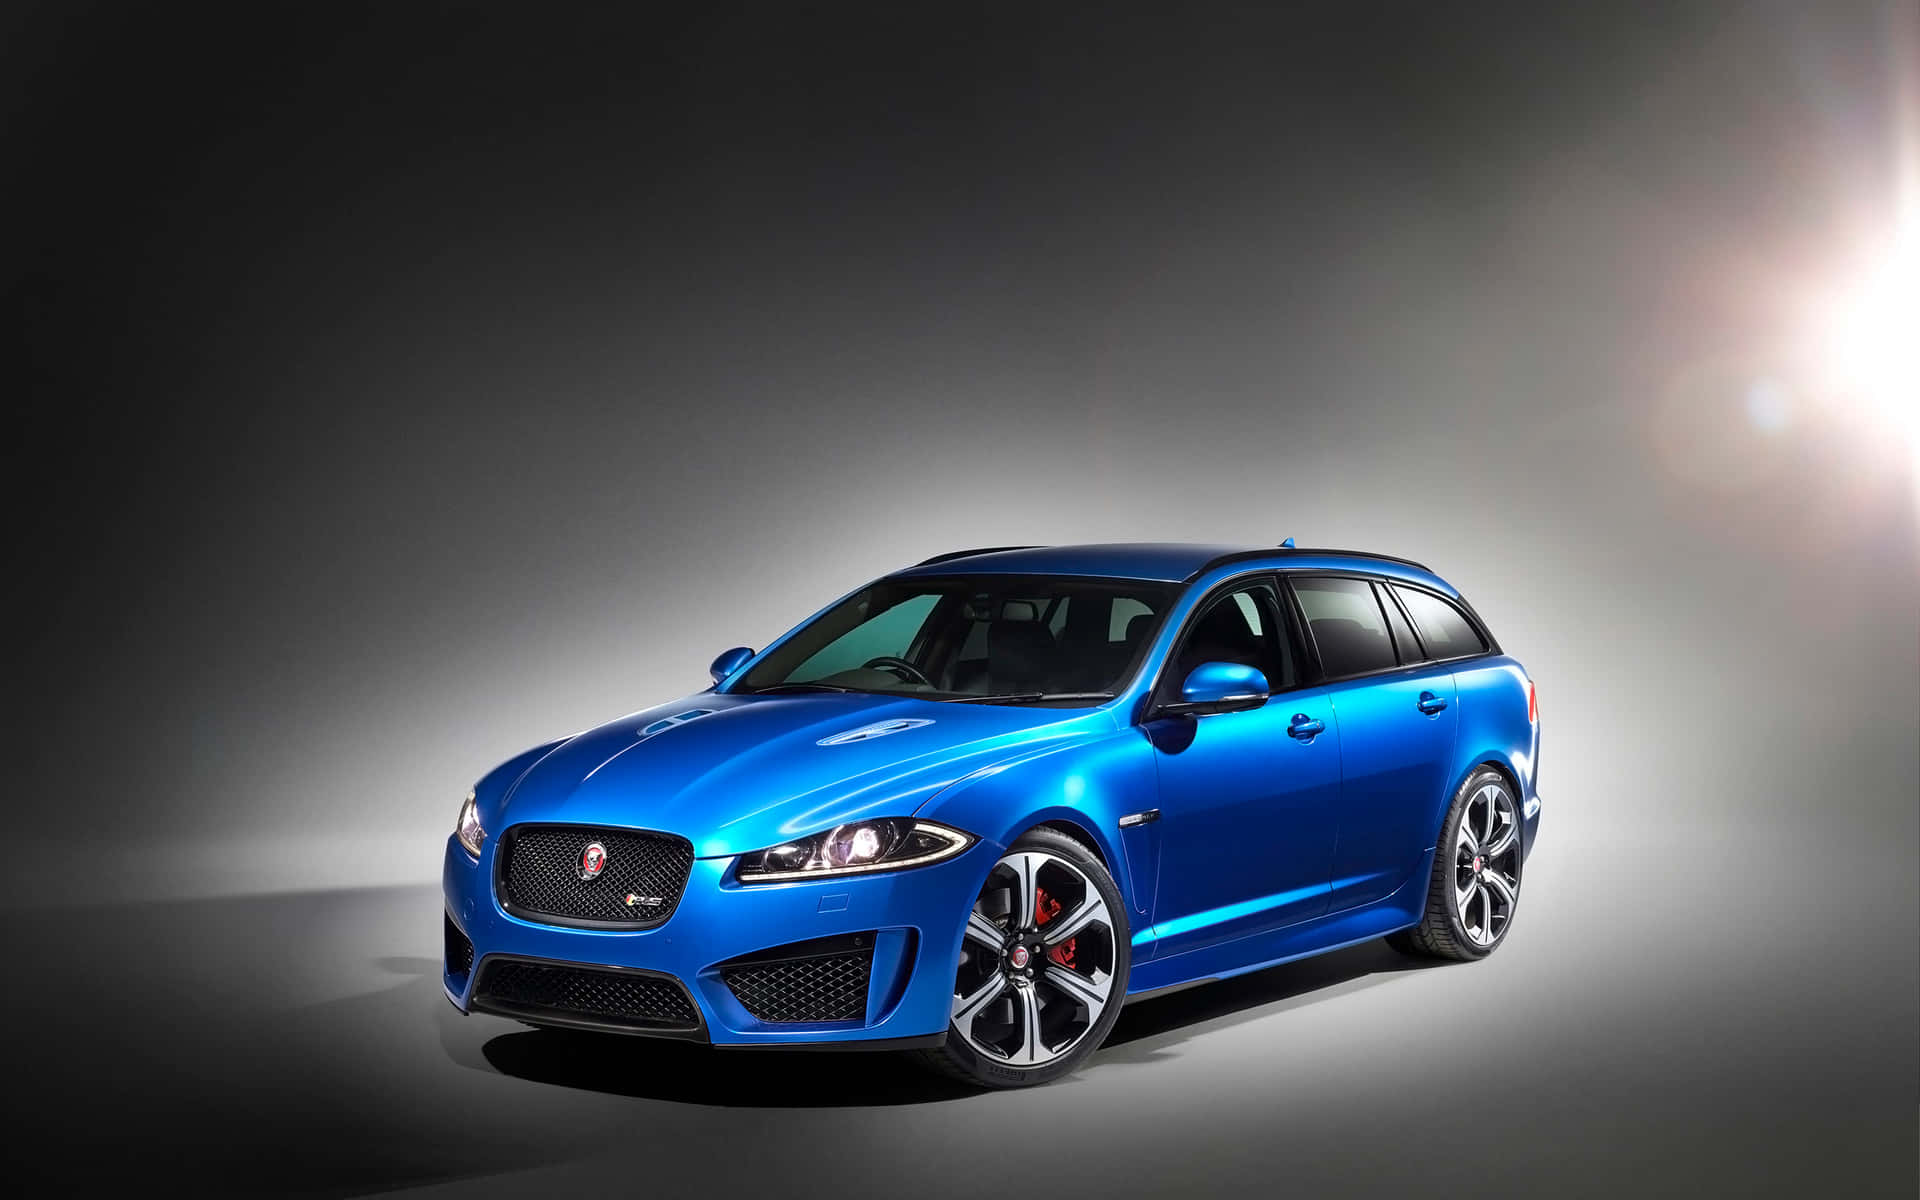 Caption: Dynamic and Stylish Jaguar XFR in Action Wallpaper